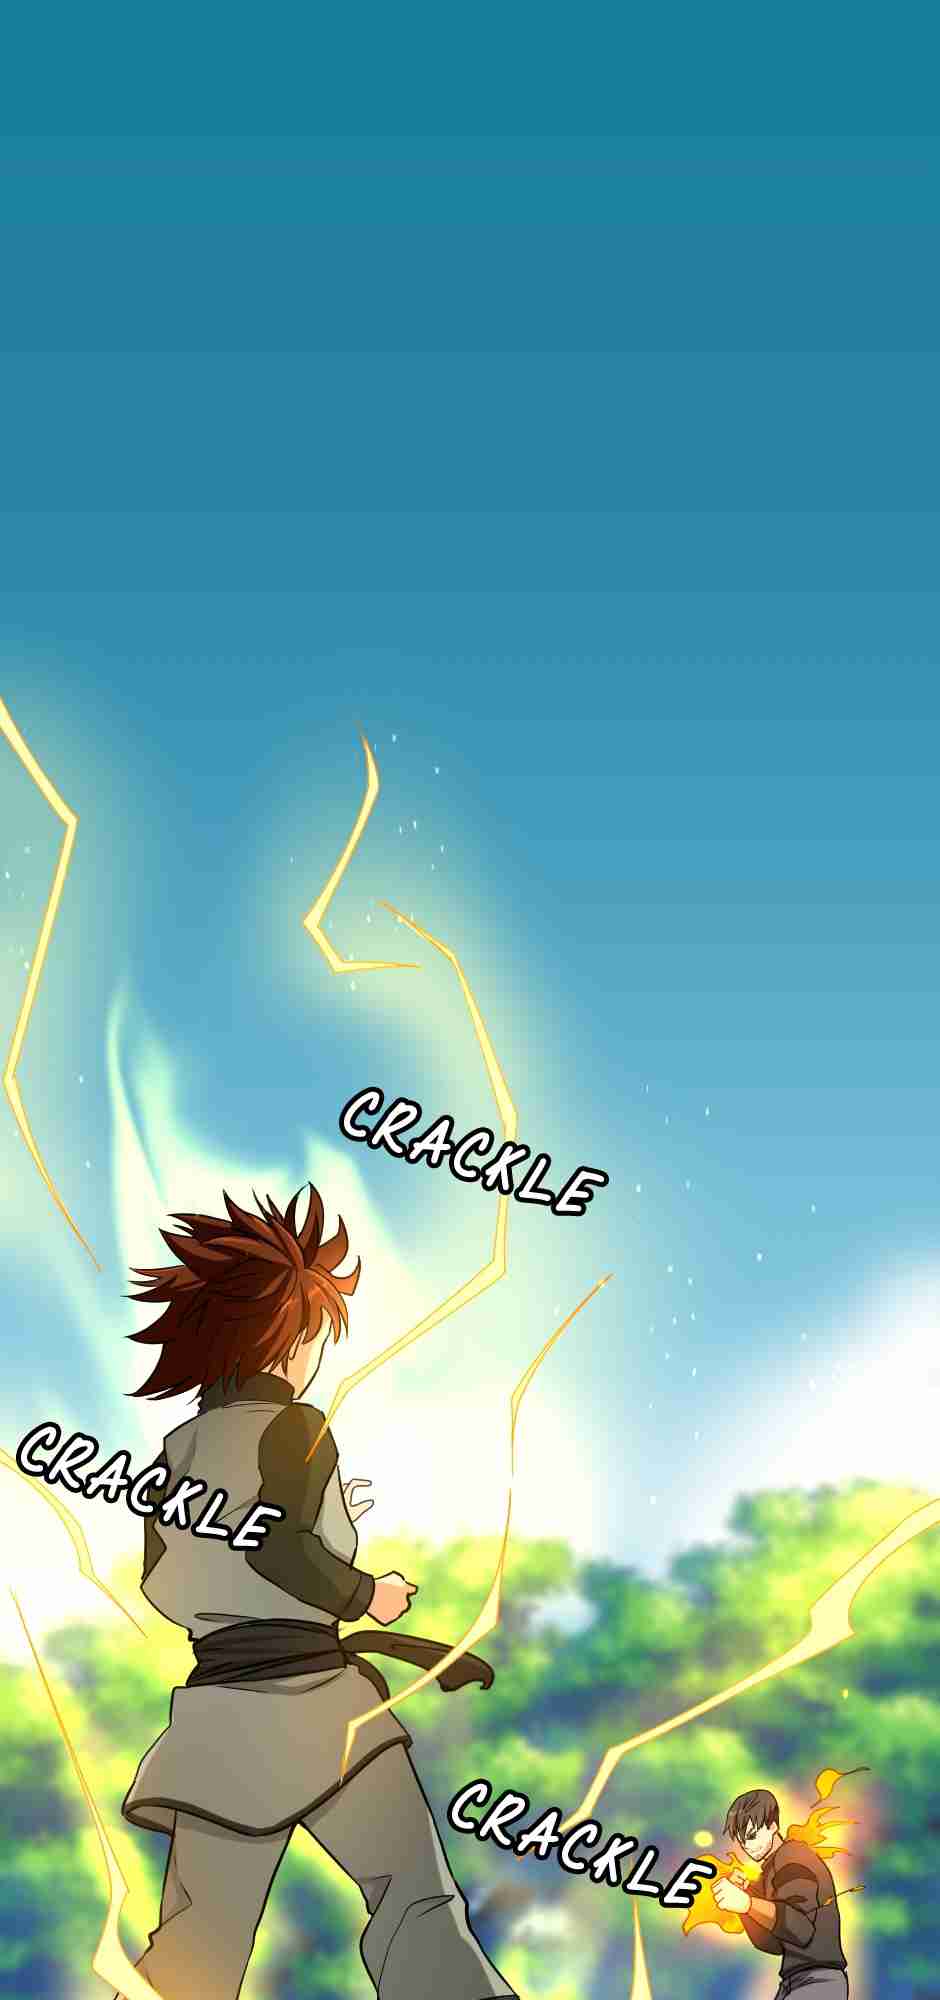 The Beginning After the End - Chapter 3310 - Image 1